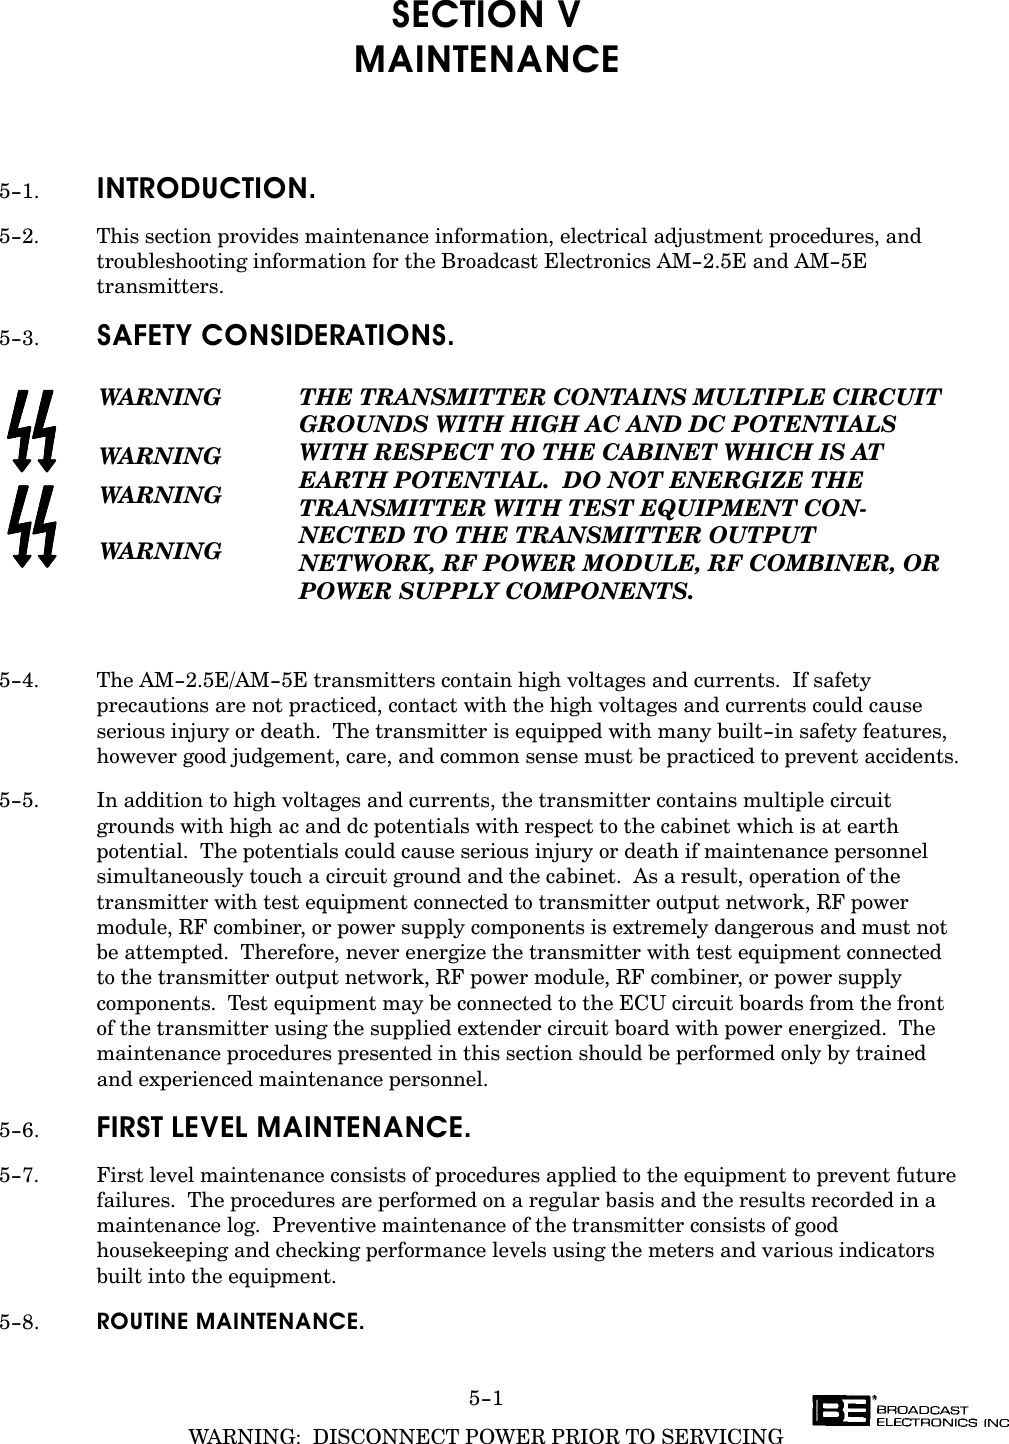 5-1WARNING:  DISCONNECT POWER PRIOR TO SERVICINGSECTION VMAINTENANCE5-1. INTRODUCTION.5-2. This section provides maintenance information, electrical adjustment procedures, andtroubleshooting information for the Broadcast Electronics AM-2.5E and AM-5Etransmitters.5-3. SAFETY CONSIDERATIONS.WARNINGWARNINGWARNINGWARNINGTHE TRANSMITTER CONTAINS MULTIPLE CIRCUITGROUNDS WITH HIGH AC AND DC POTENTIALSWITH RESPECT TO THE CABINET WHICH IS AT EARTH POTENTIAL.  DO NOT ENERGIZE THETRANSMITTER WITH TEST EQUIPMENT CONĆNECTED TO THE TRANSMITTER OUTPUT NETWORK, RF POWER MODULE, RF COMBINER, ORPOWER SUPPLY COMPONENTS.5-4. The AM-2.5E/AM-5E transmitters contain high voltages and currents.  If safetyprecautions are not practiced, contact with the high voltages and currents could causeserious injury or death.  The transmitter is equipped with many built-in safety features,however good judgement, care, and common sense must be practiced to prevent accidents.5-5. In addition to high voltages and currents, the transmitter contains multiple circuitgrounds with high ac and dc potentials with respect to the cabinet which is at earthpotential.  The potentials could cause serious injury or death if maintenance personnelsimultaneously touch a circuit ground and the cabinet.  As a result, operation of thetransmitter with test equipment connected to transmitter output network, RF powermodule, RF combiner, or power supply components is extremely dangerous and must notbe attempted.  Therefore, never energize the transmitter with test equipment connected to the transmitter output network, RF power module, RF combiner, or power supplycomponents.  Test equipment may be connected to the ECU circuit boards from the front of the transmitter using the supplied extender circuit board with power energized.  Themaintenance procedures presented in this section should be performed only by trained and experienced maintenance personnel.5-6. FIRST LEVEL MAINTENANCE.5-7. First level maintenance consists of procedures applied to the equipment to prevent futurefailures.  The procedures are performed on a regular basis and the results recorded in amaintenance log.  Preventive maintenance of the transmitter consists of goodhousekeeping and checking performance levels using the meters and various indicatorsbuilt into the equipment.5-8. ROUTINE MAINTENANCE.